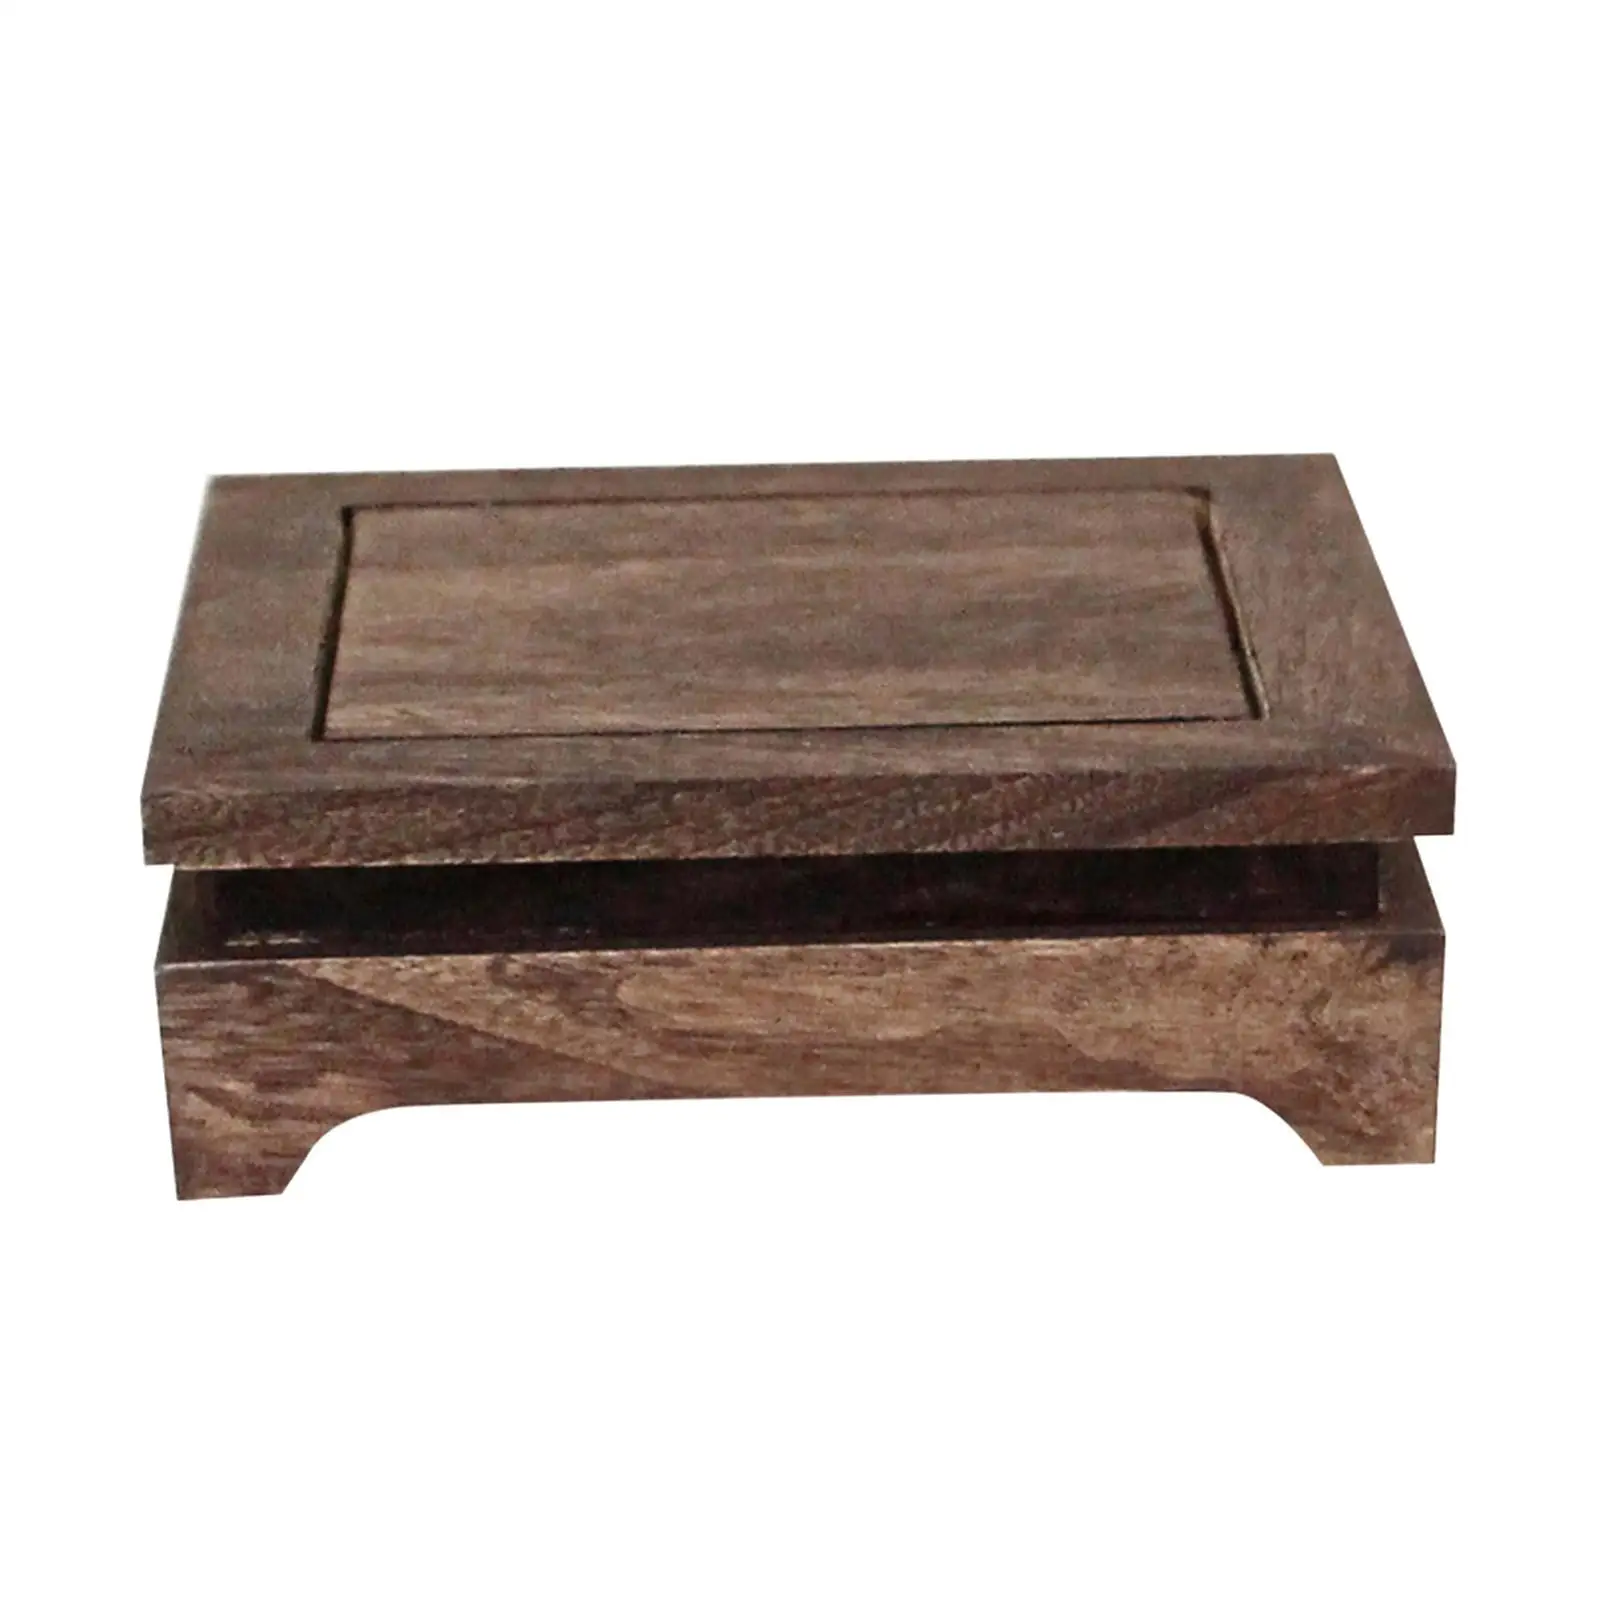 Rectangular Base for Collectibles Fishbowl Stand Figurine Teapot Base Ornament Wooden Display Stand Decorative Base 4cm Height